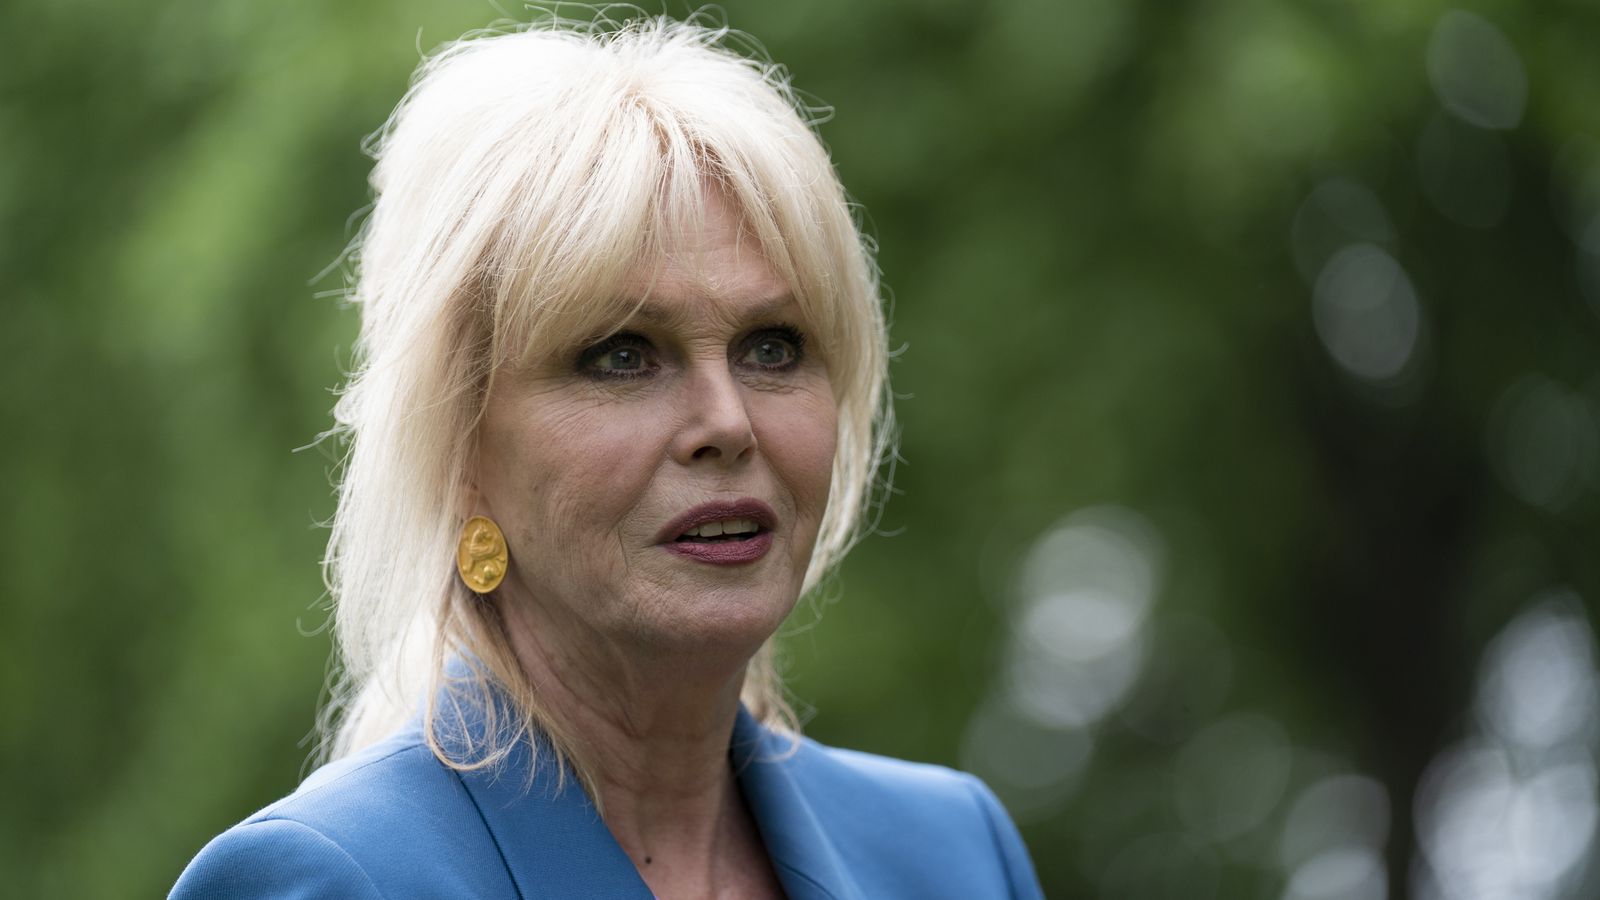 Dame Joanna Lumley calls out 'creepy' covert snappers 'stealing' photos without permission